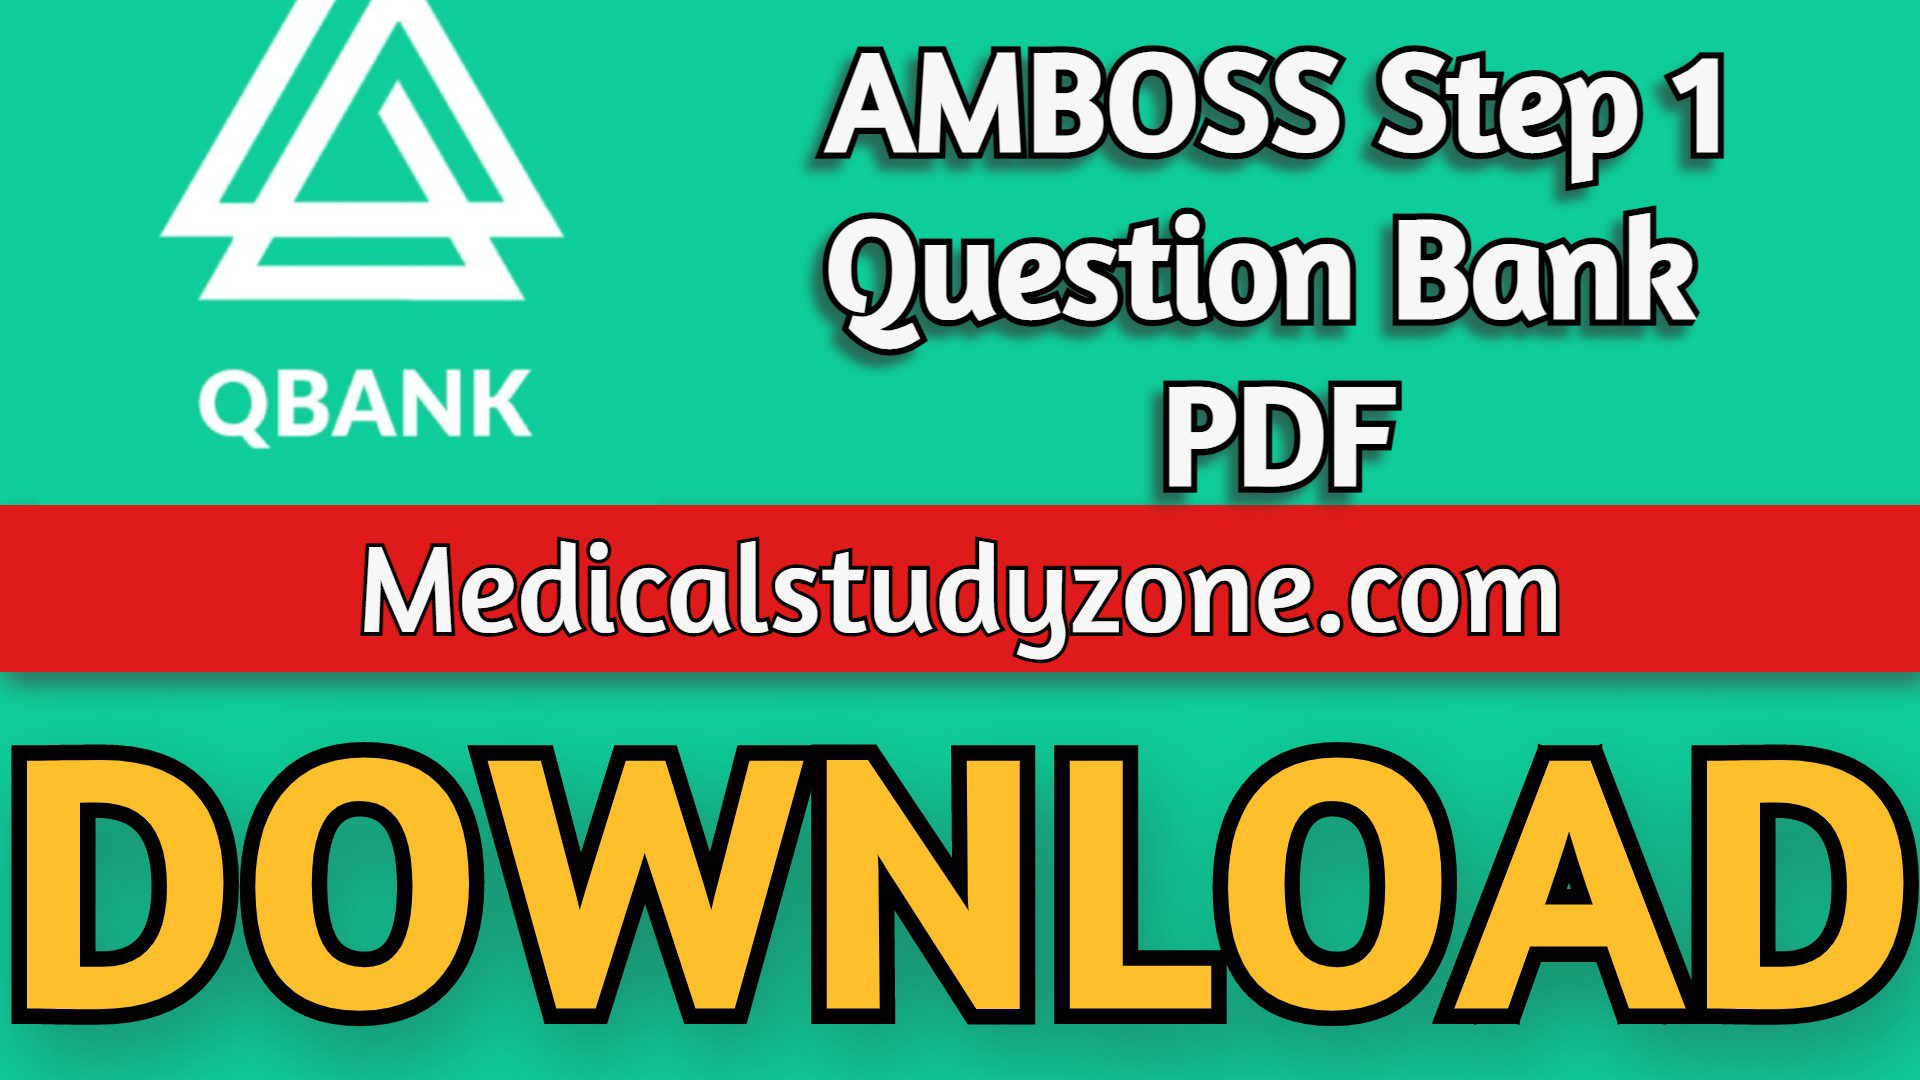 AMBOSS Step 1 Question Bank 2022 PDF Download Free